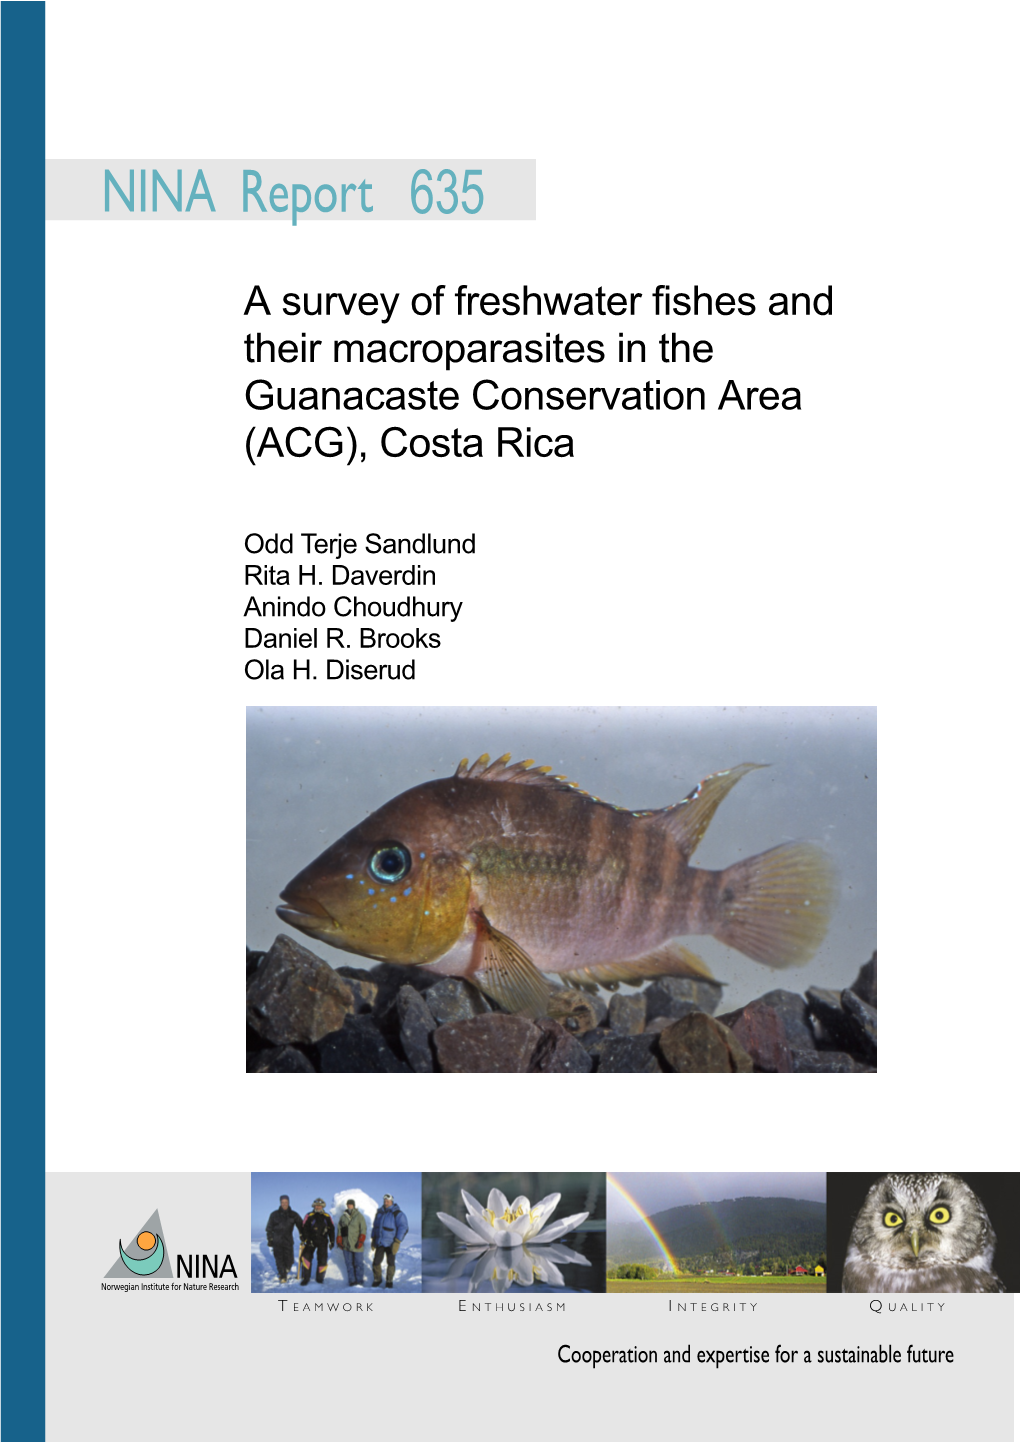 A Survey of Freshwater Fishes and Their Macroparasites in the Guanacaste Conservation Area (ACG), Costa Rica